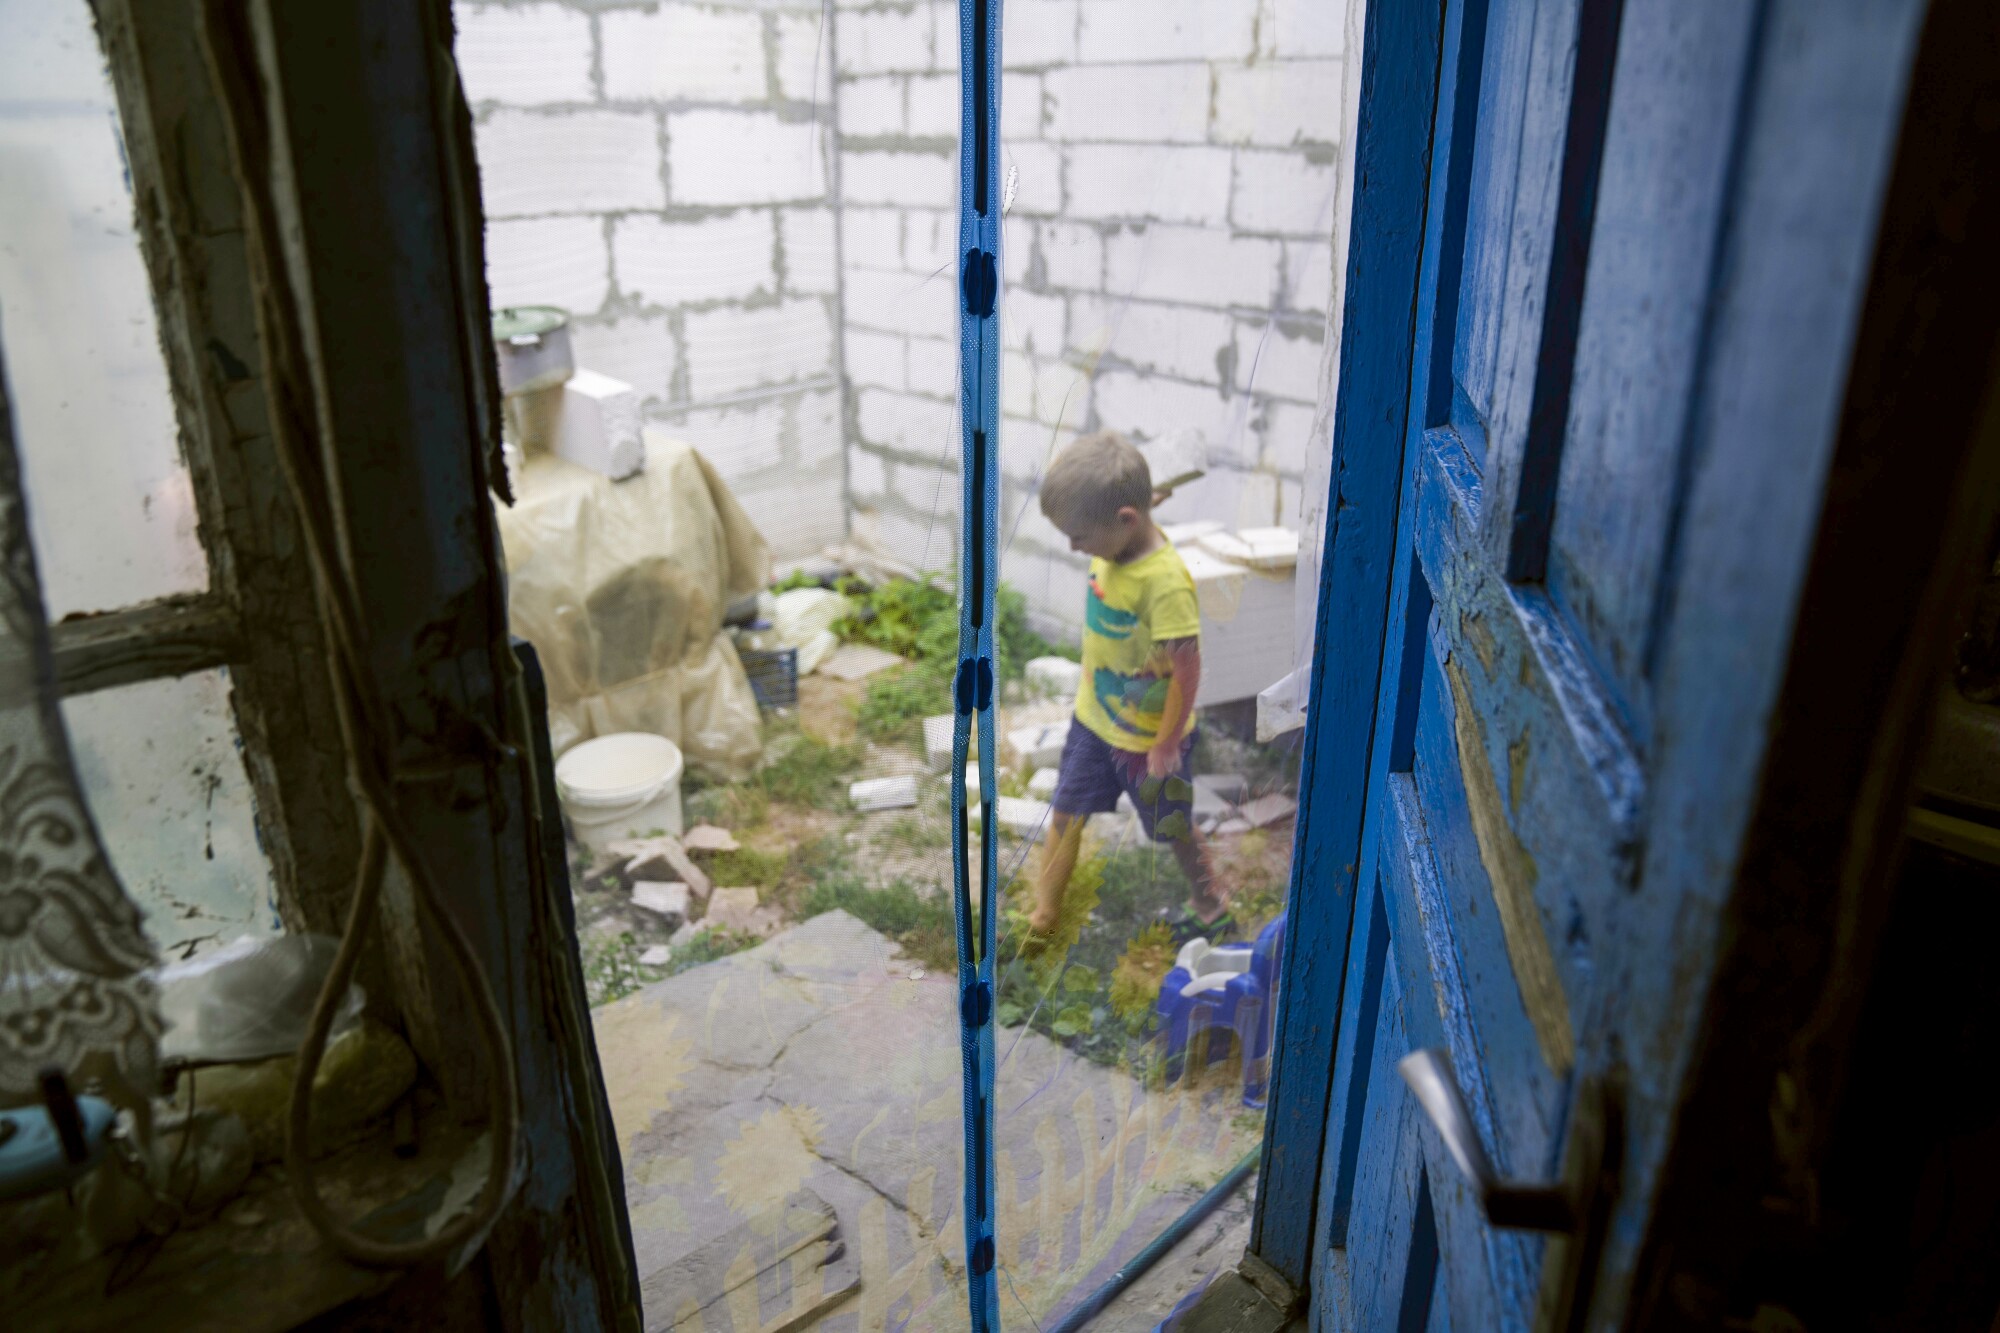 A boy appears in the yard through the door.